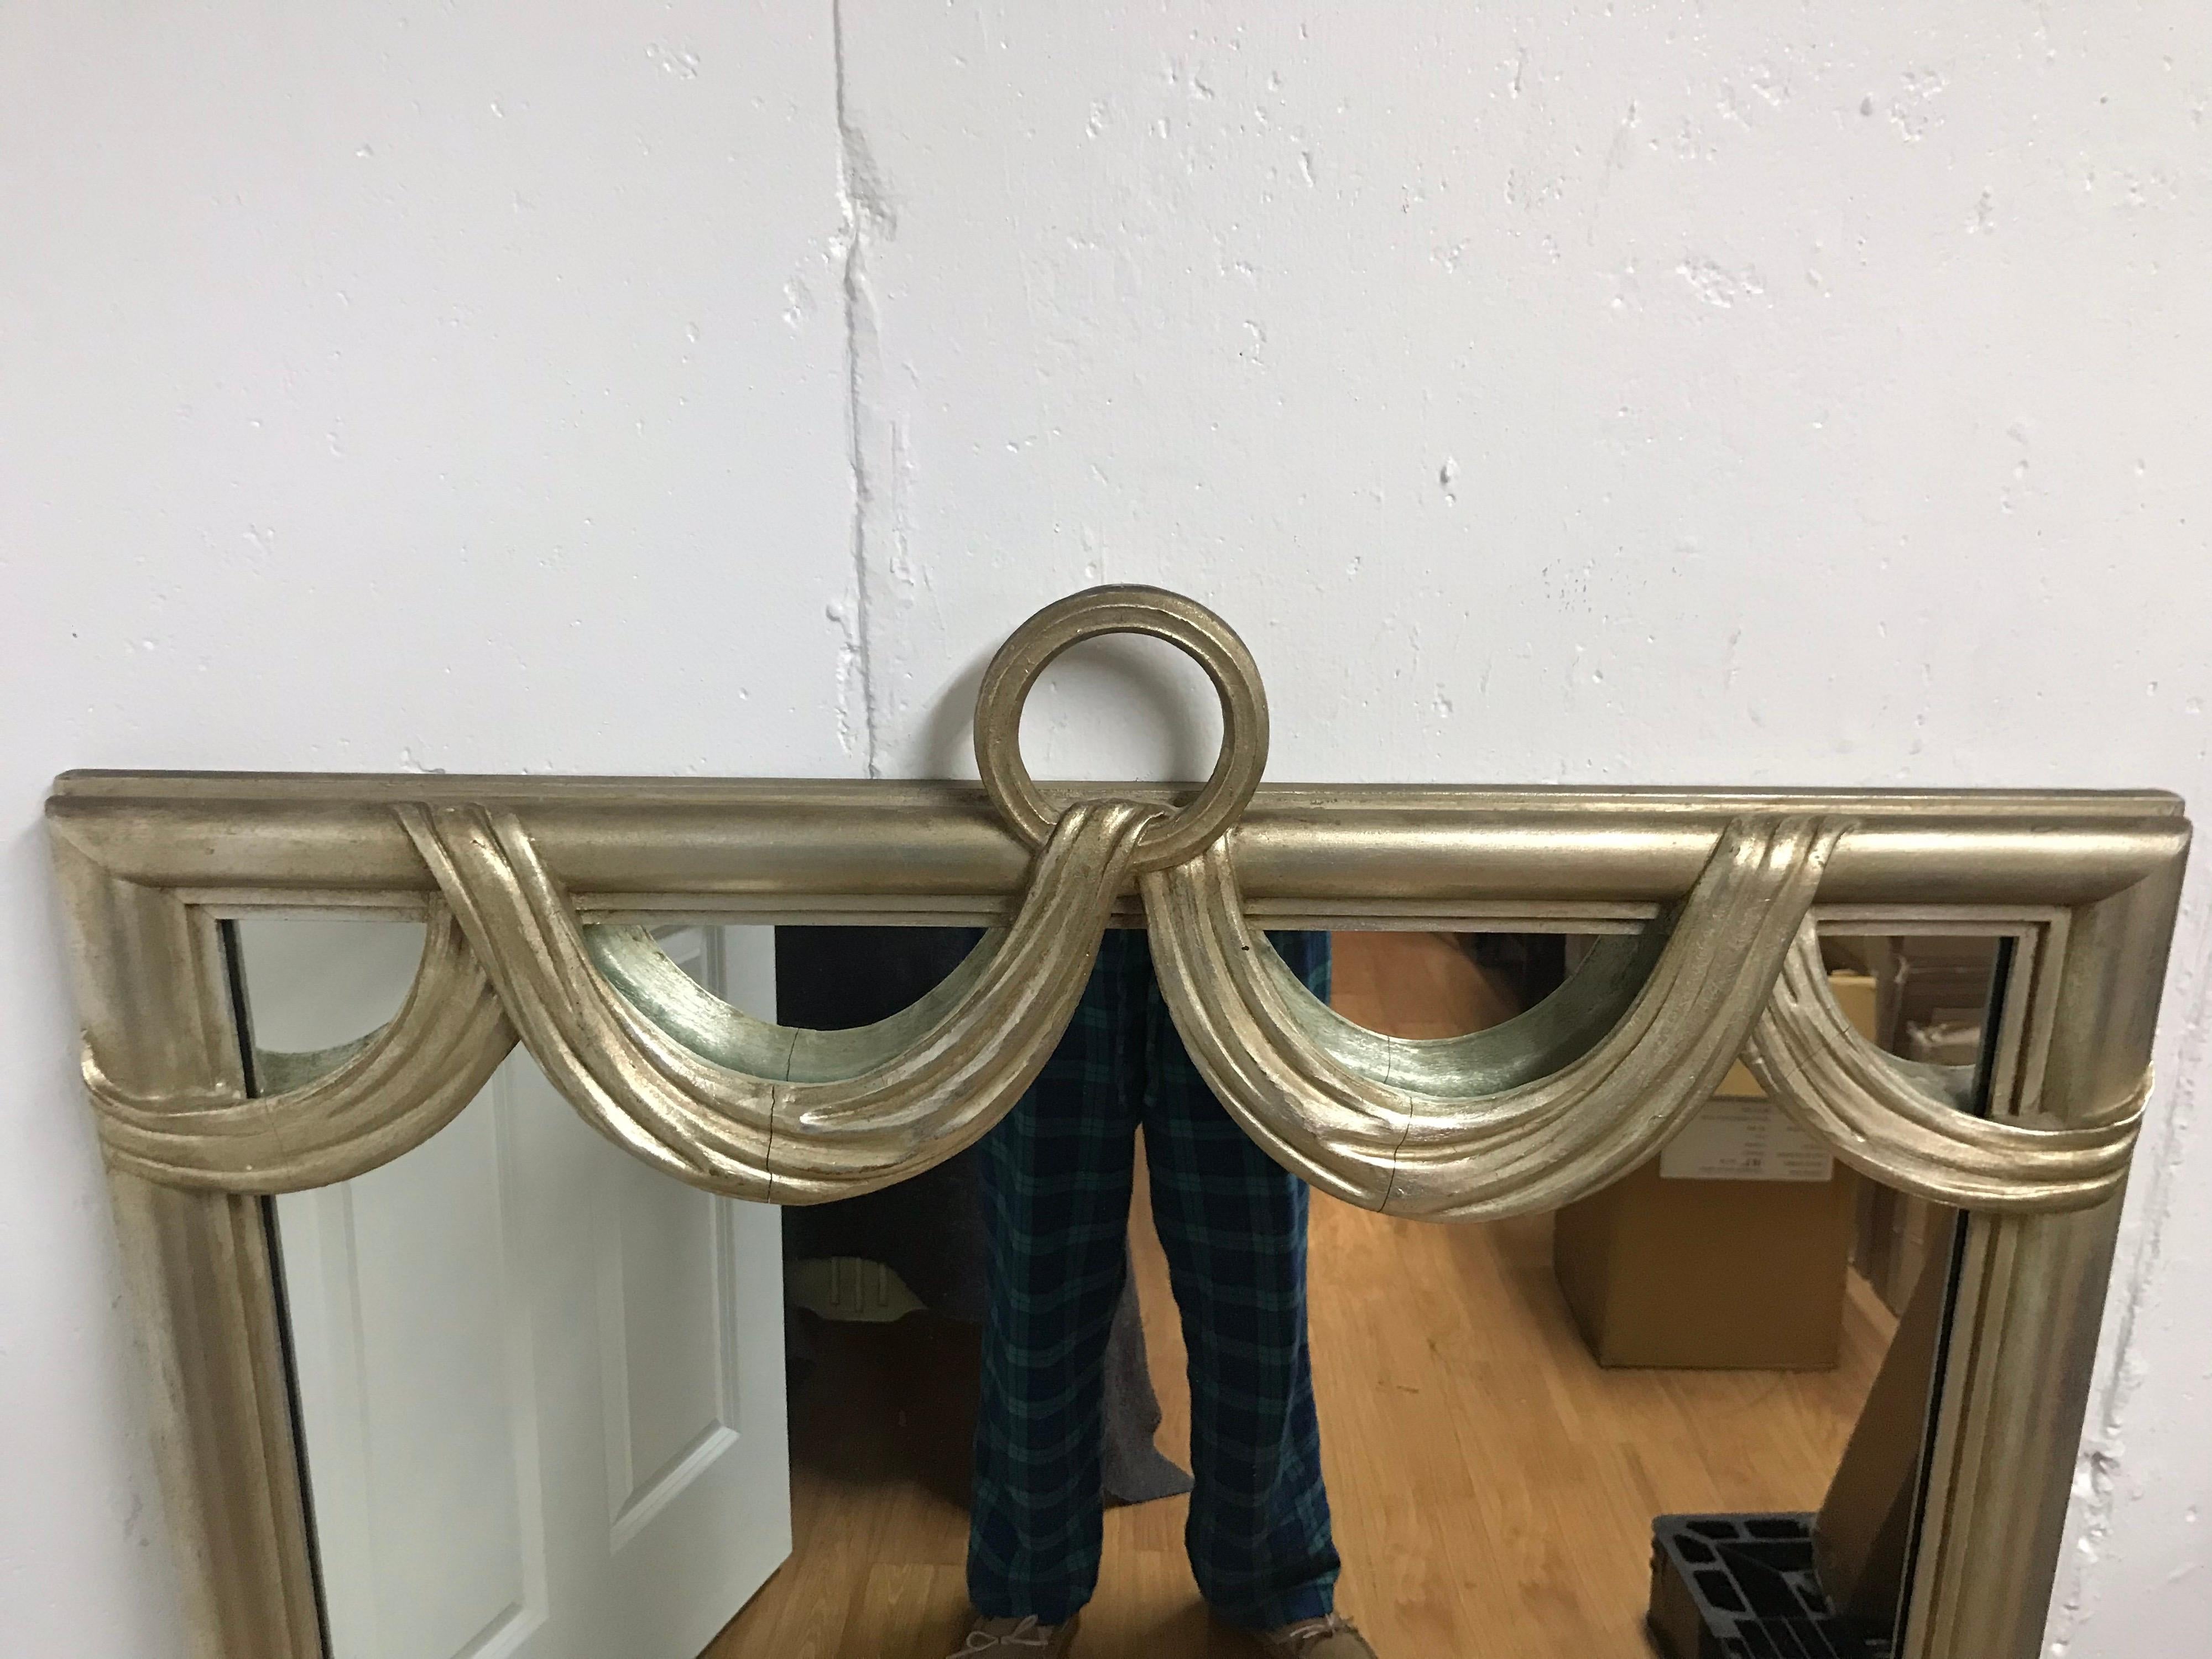 This is a wonderful heavy Hollywood Regency style silver/gold giltwood mirror from 1960s 
The swag is a unique design you don’t see very often.